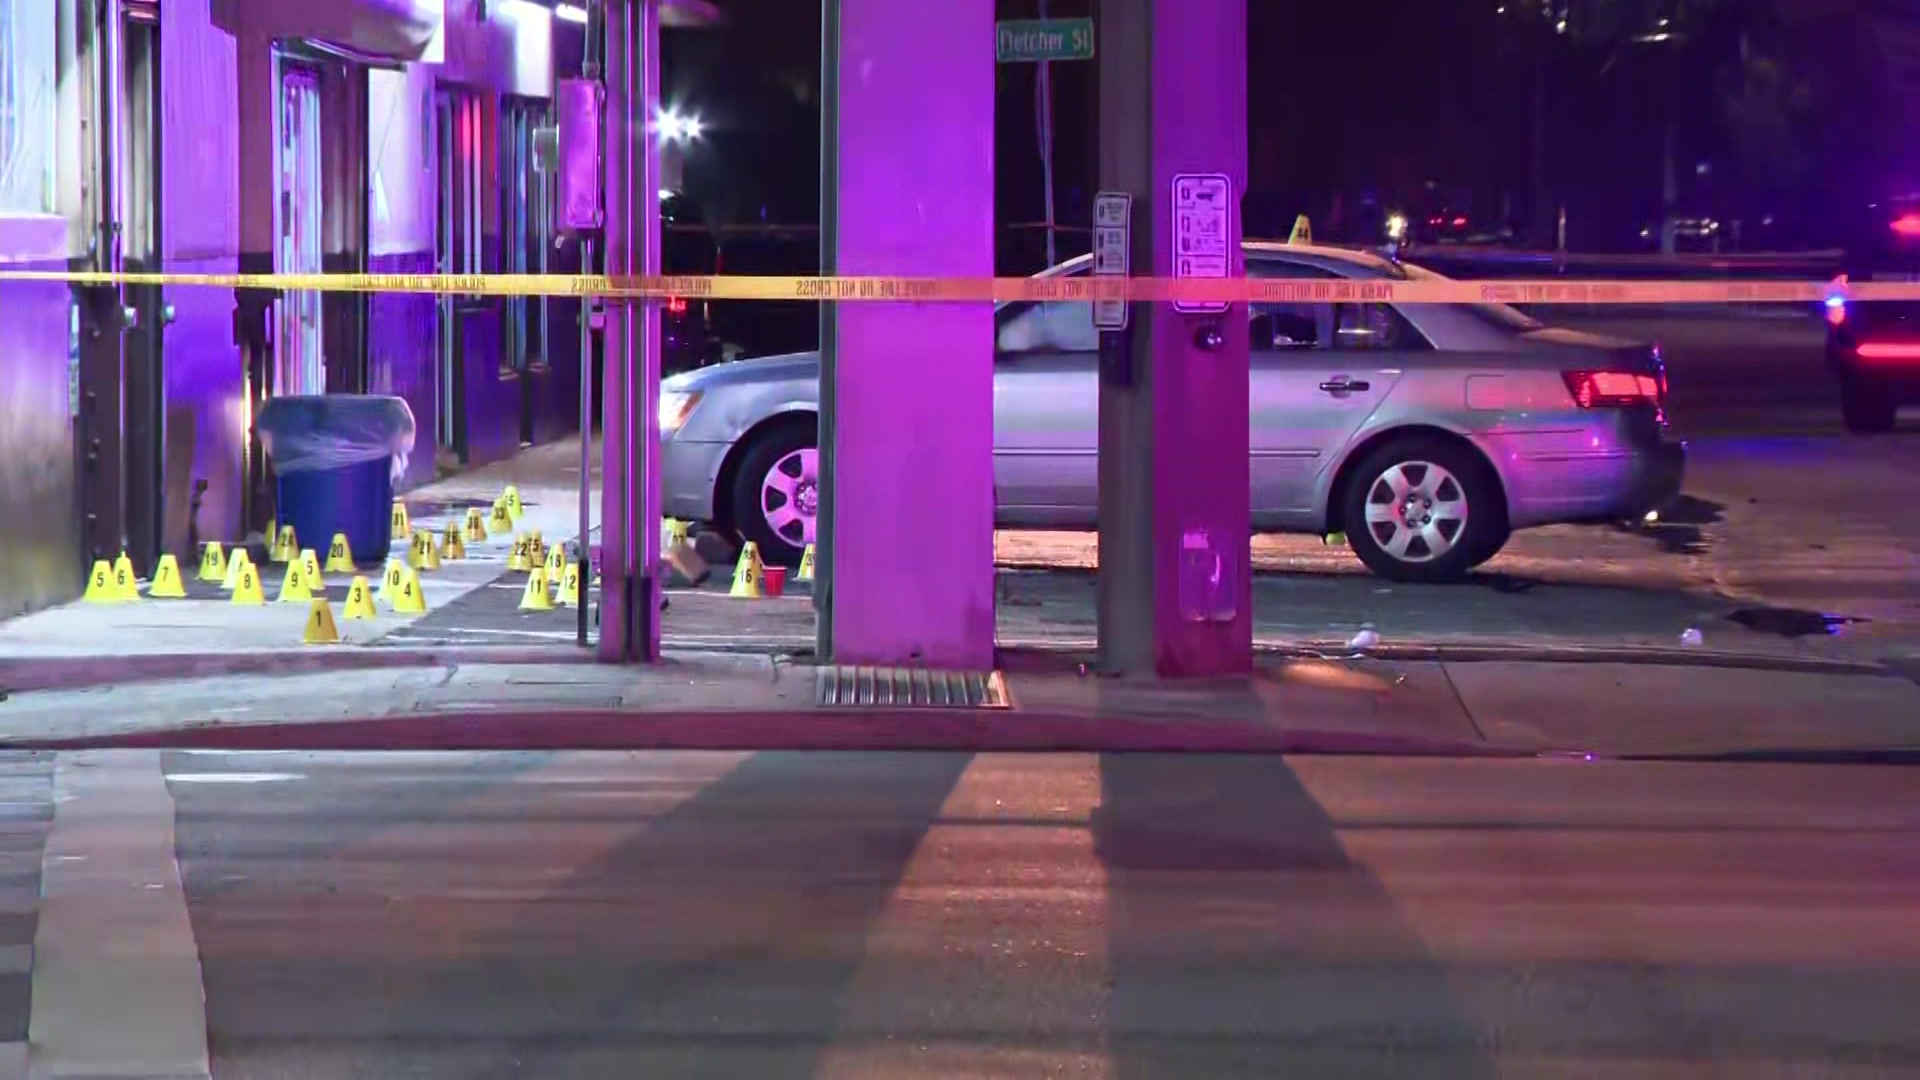 Police: 2 Wounded In Shooting Between 2 Vehicles In Battle That Stretched From Hallandale Beach Into Hollywood